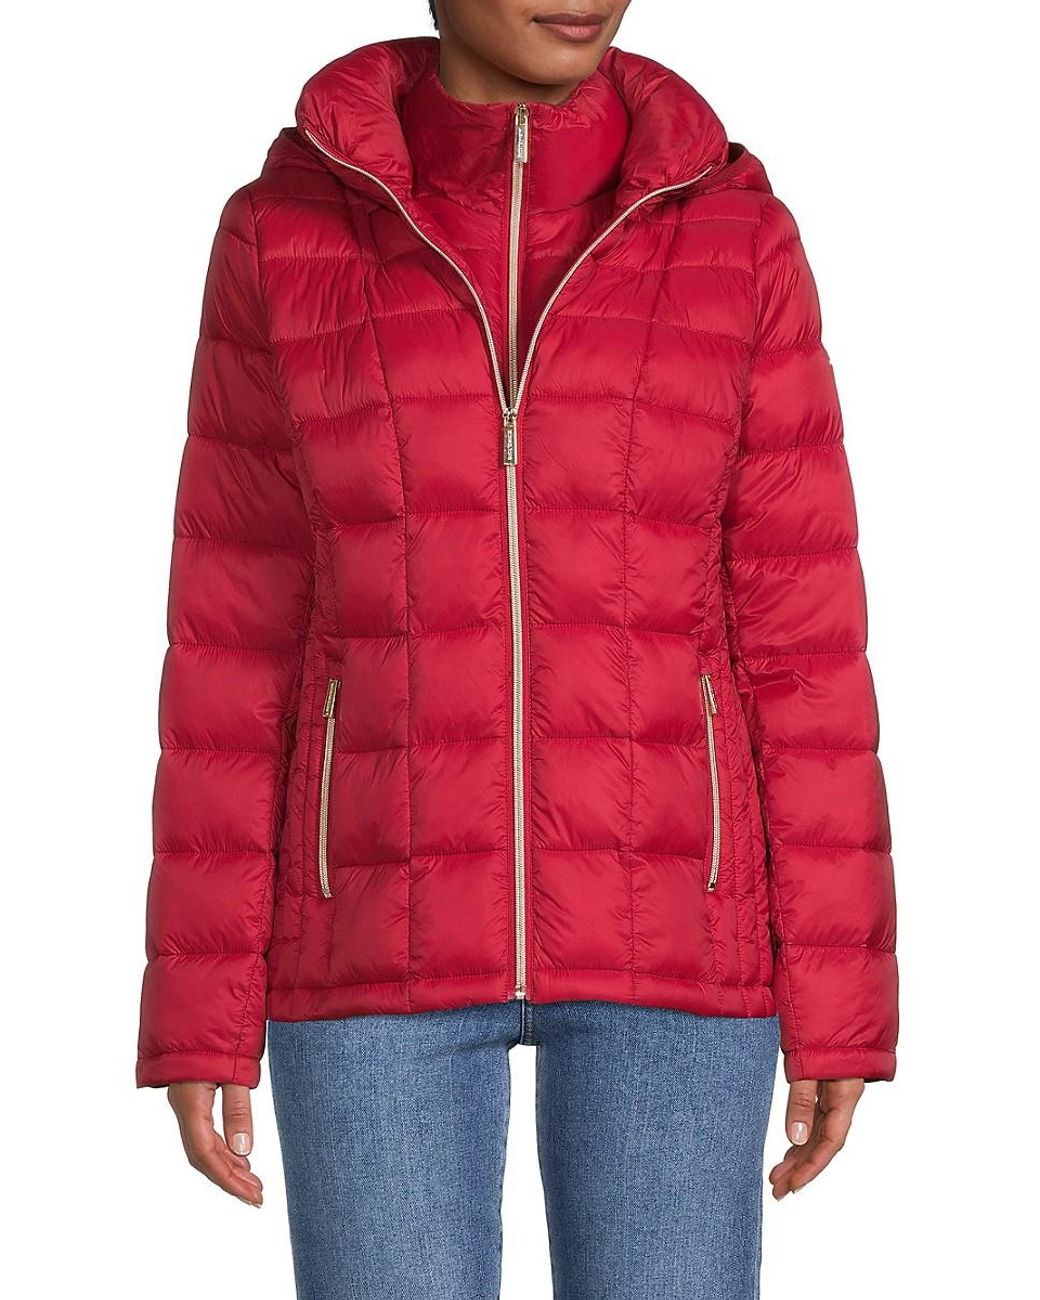 MICHAEL Michael Kors Packable Puffer Jacket in Red | Lyst